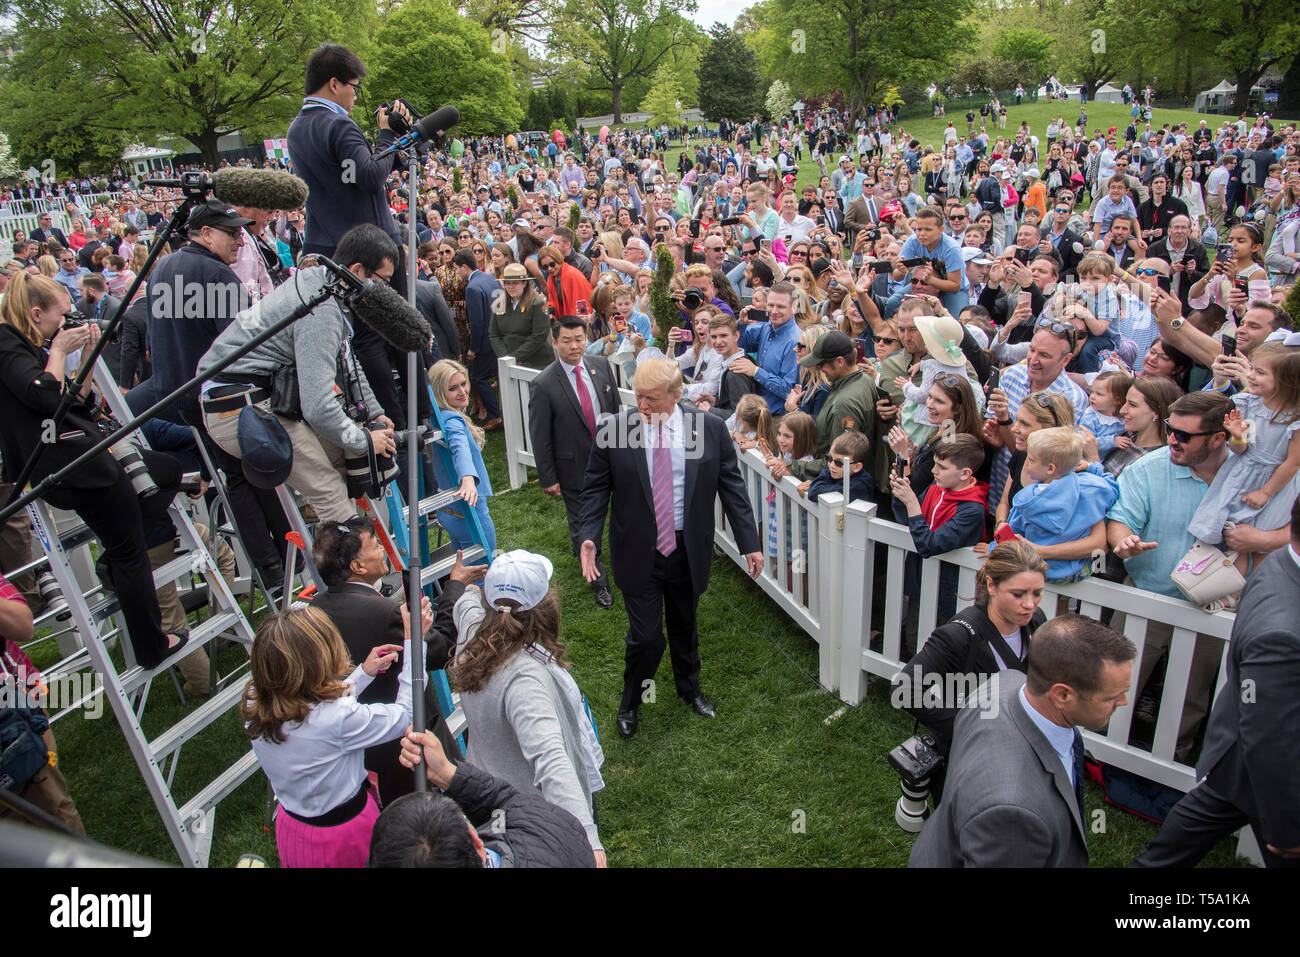 Washington DC, April 22, 2019, USA:At the annual White House Easter egg hunt, thousands of families enjoy the activities on the South Lawn of the Whit Stock Photo